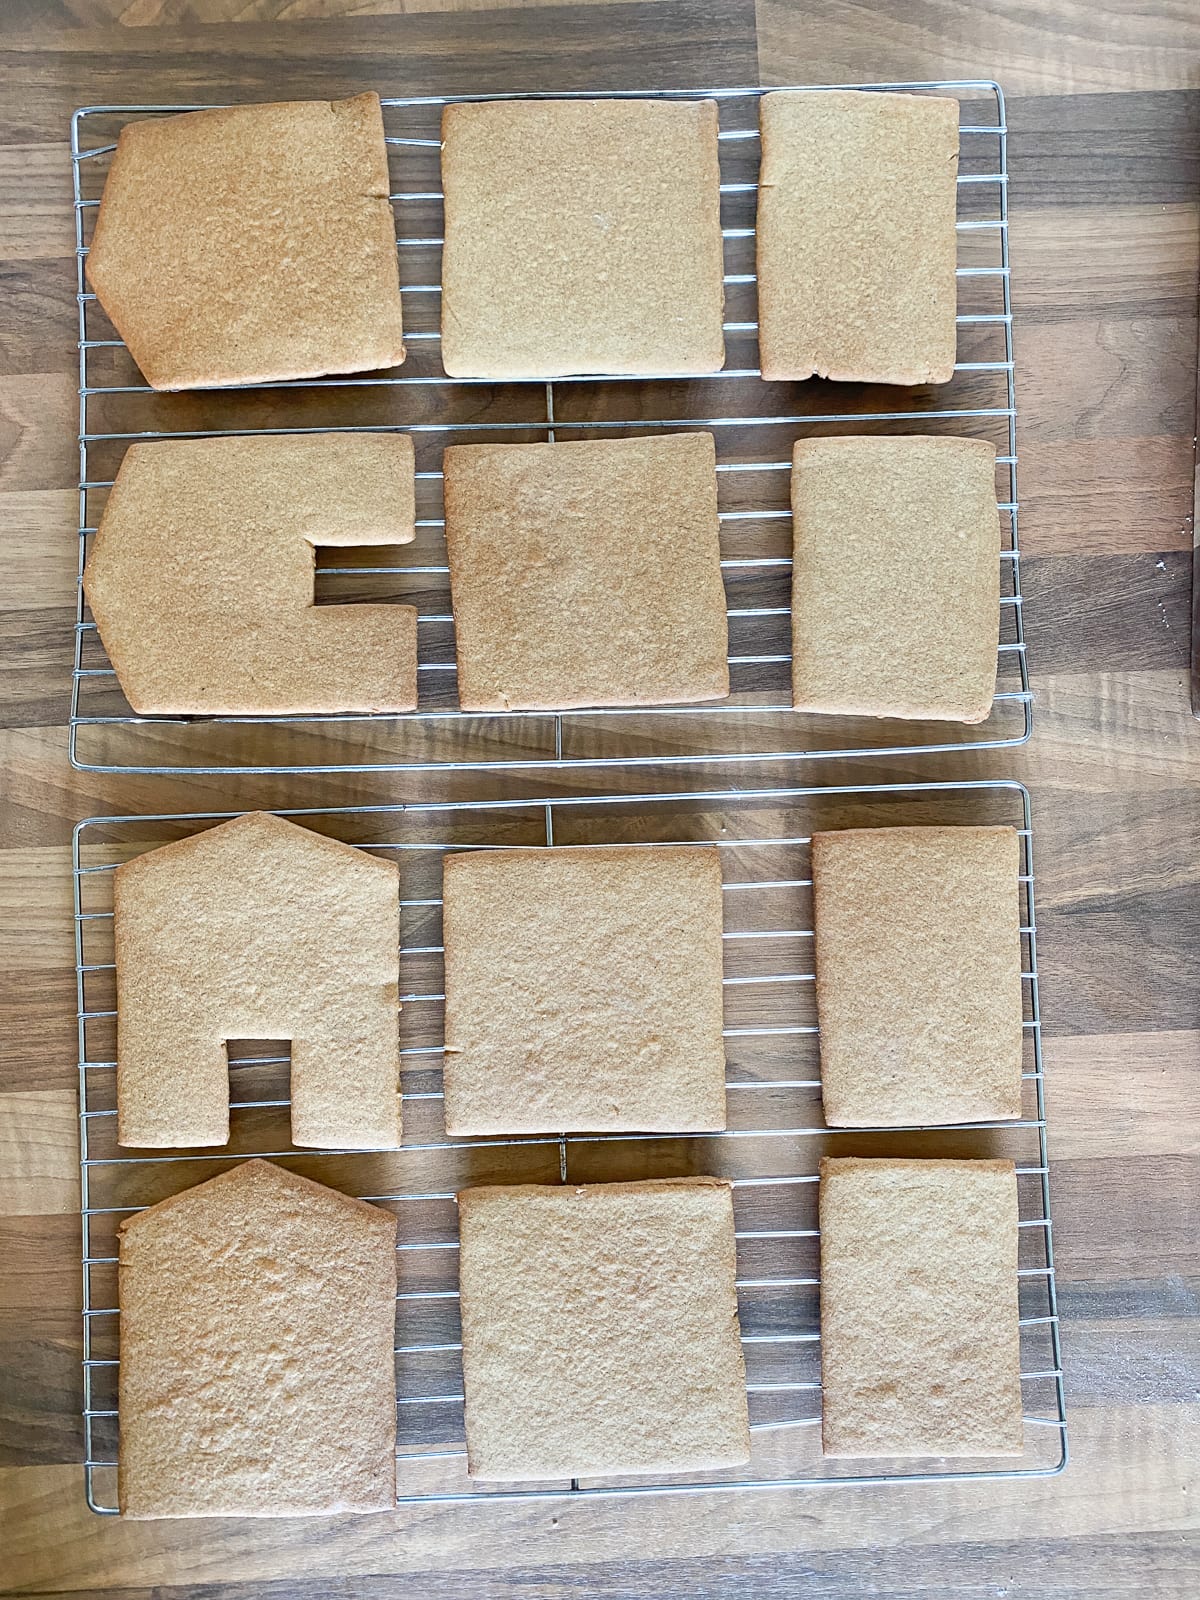 Baked gingerbread house pieces on cooling rack